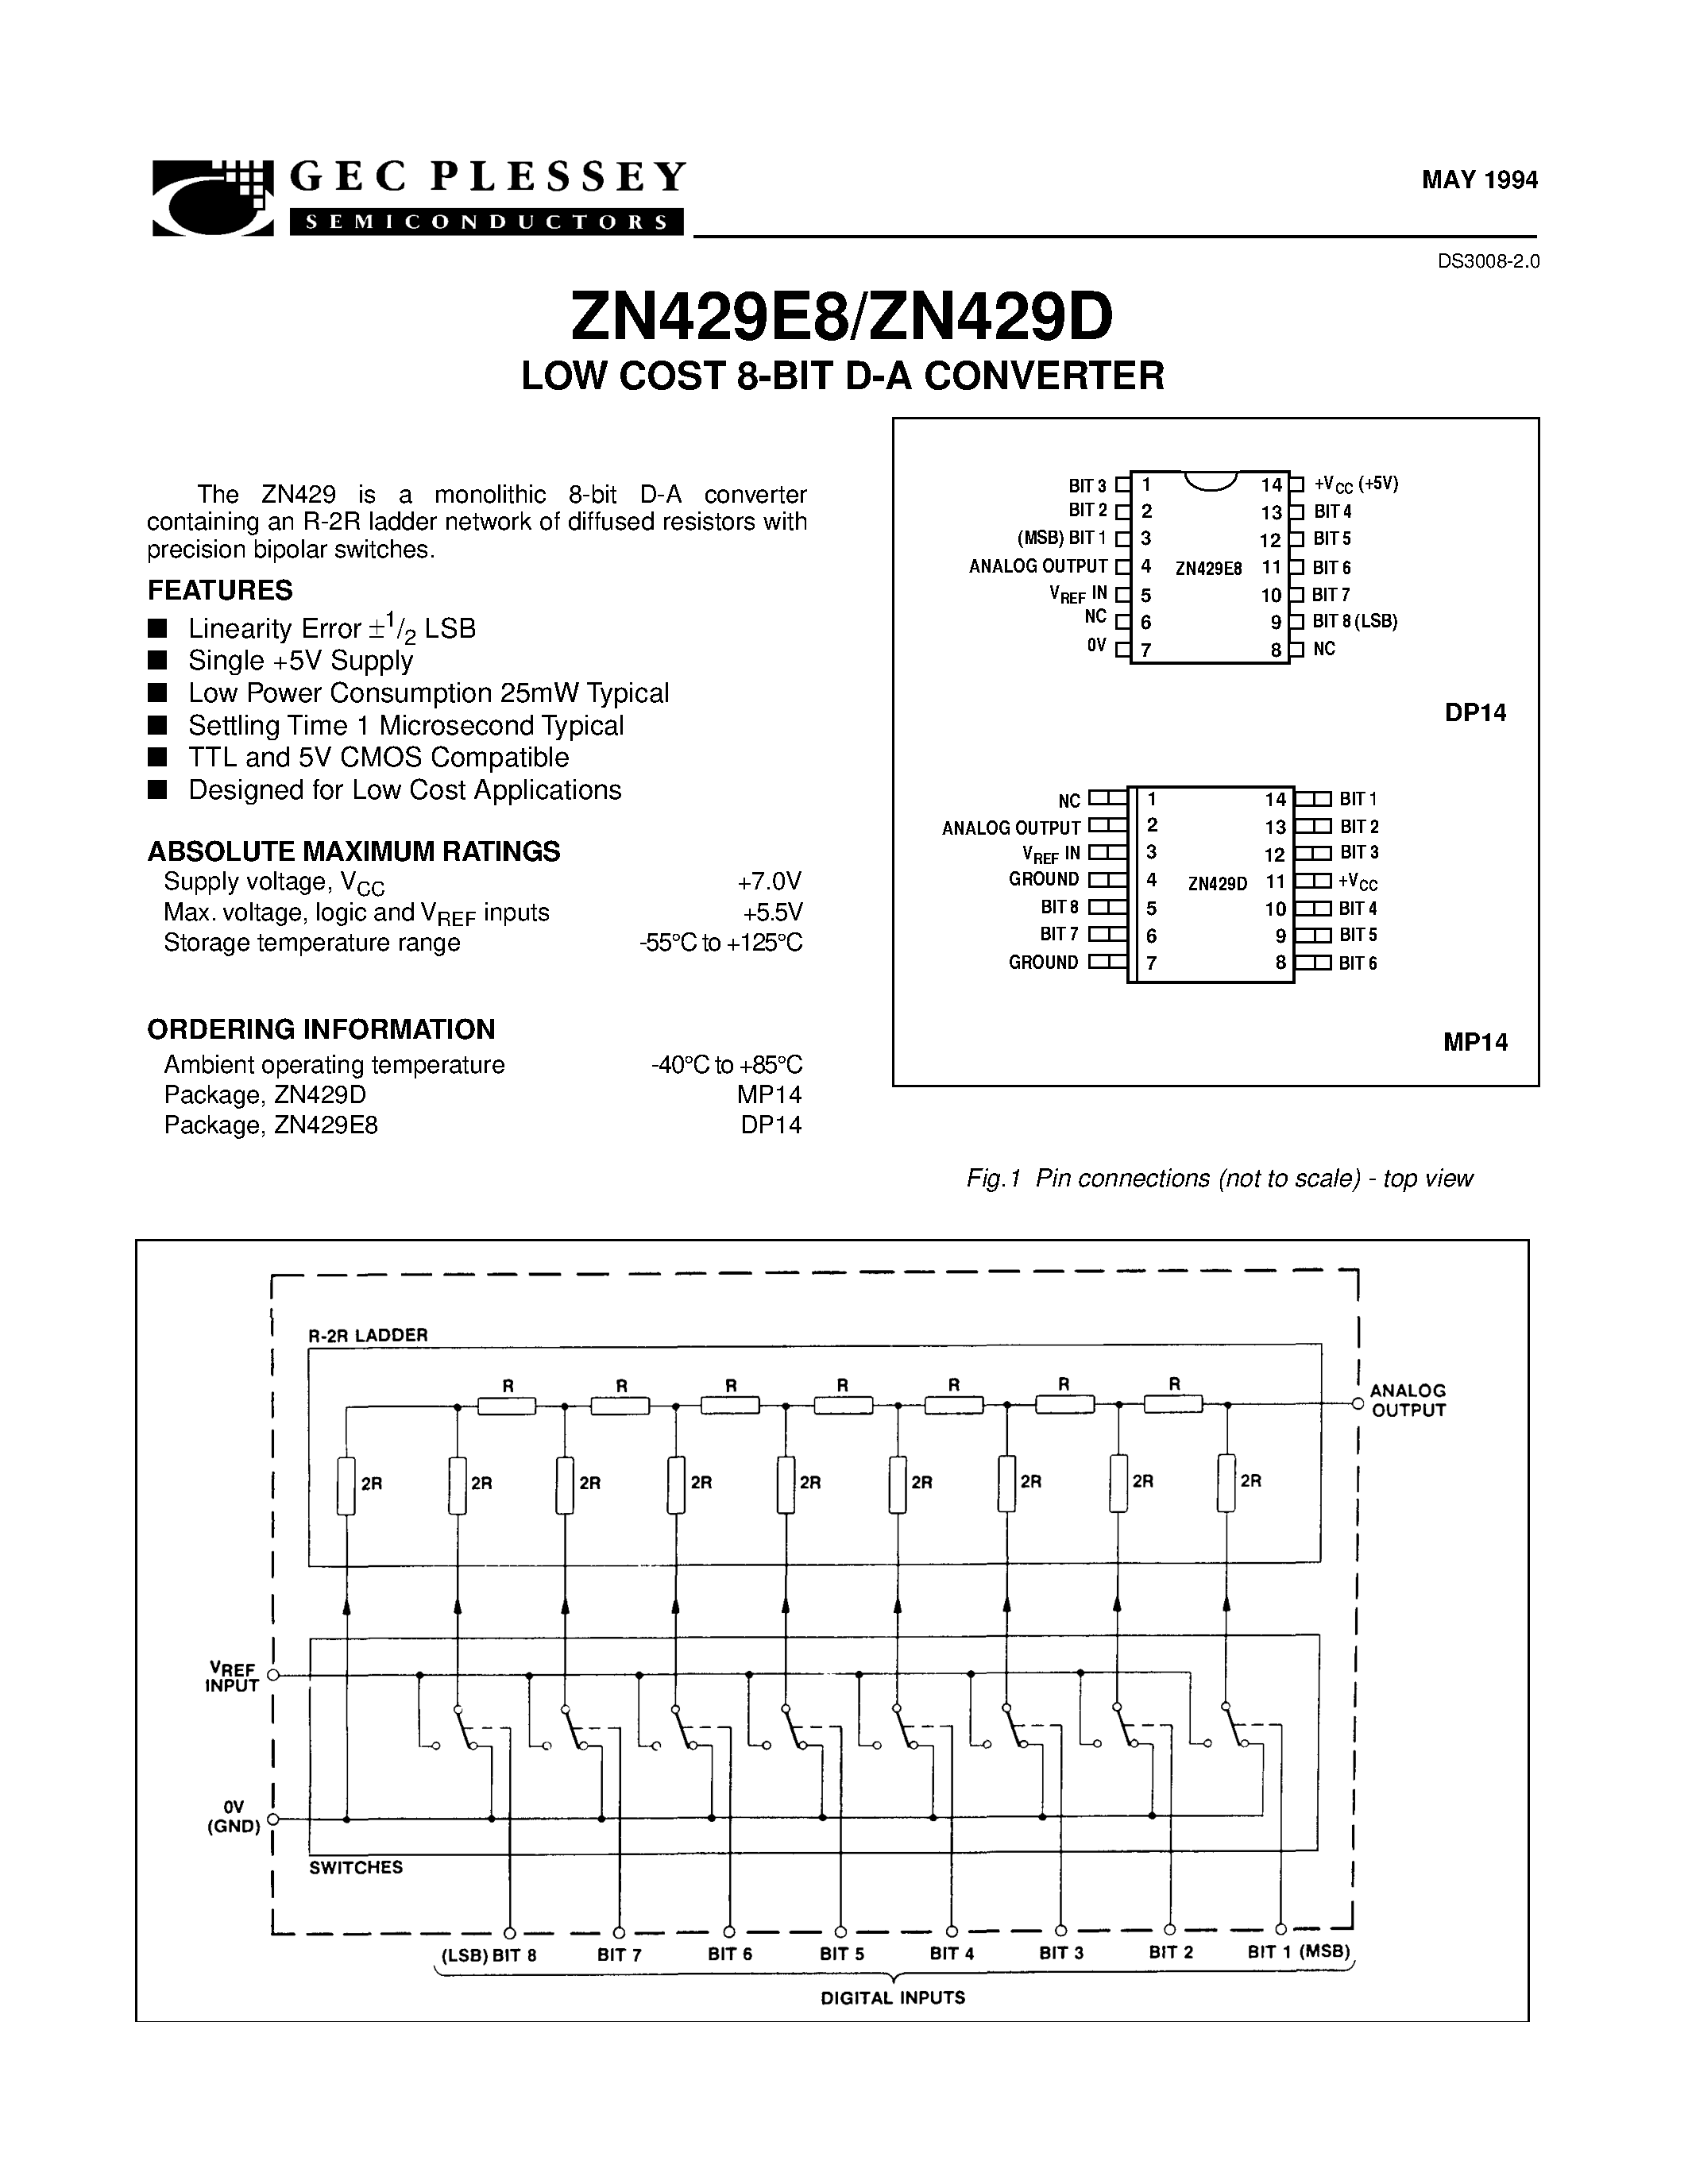 Datasheet ZN429E8 - LOW COST 8-BIT D-A CONVERTER page 2